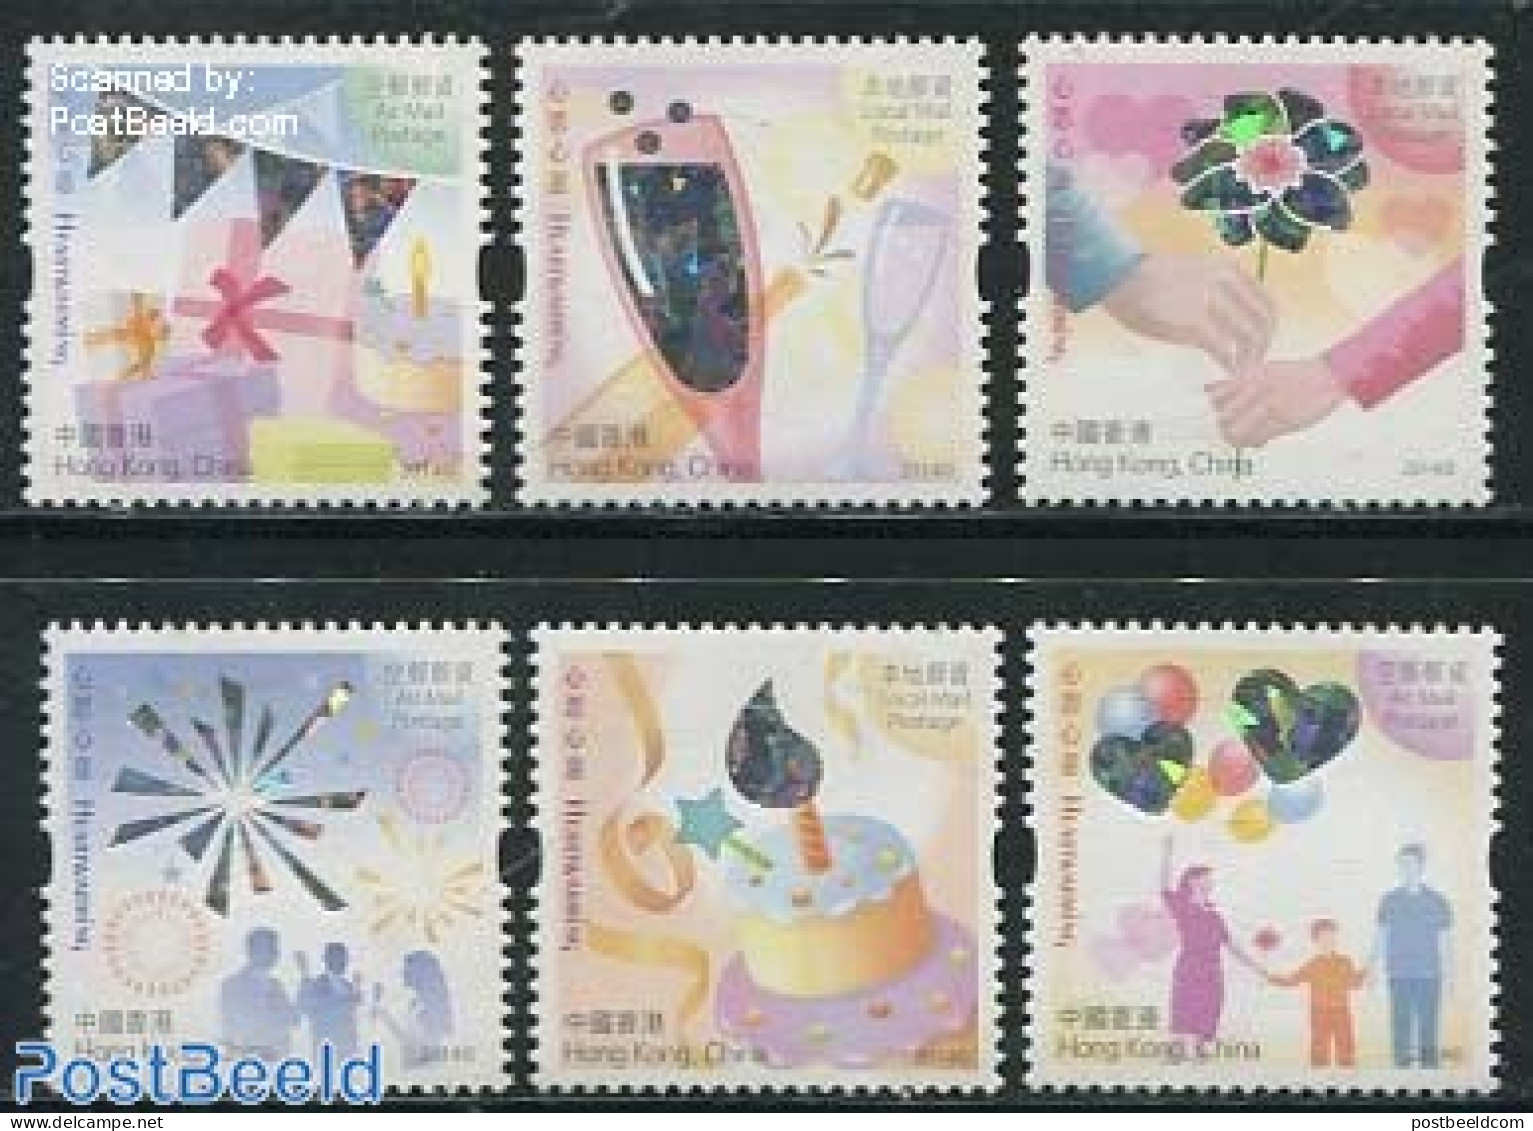 Hong Kong 2014 Wishing Stamps 6v, Mint NH, Various - Greetings & Wishing Stamps - Holograms - Unused Stamps